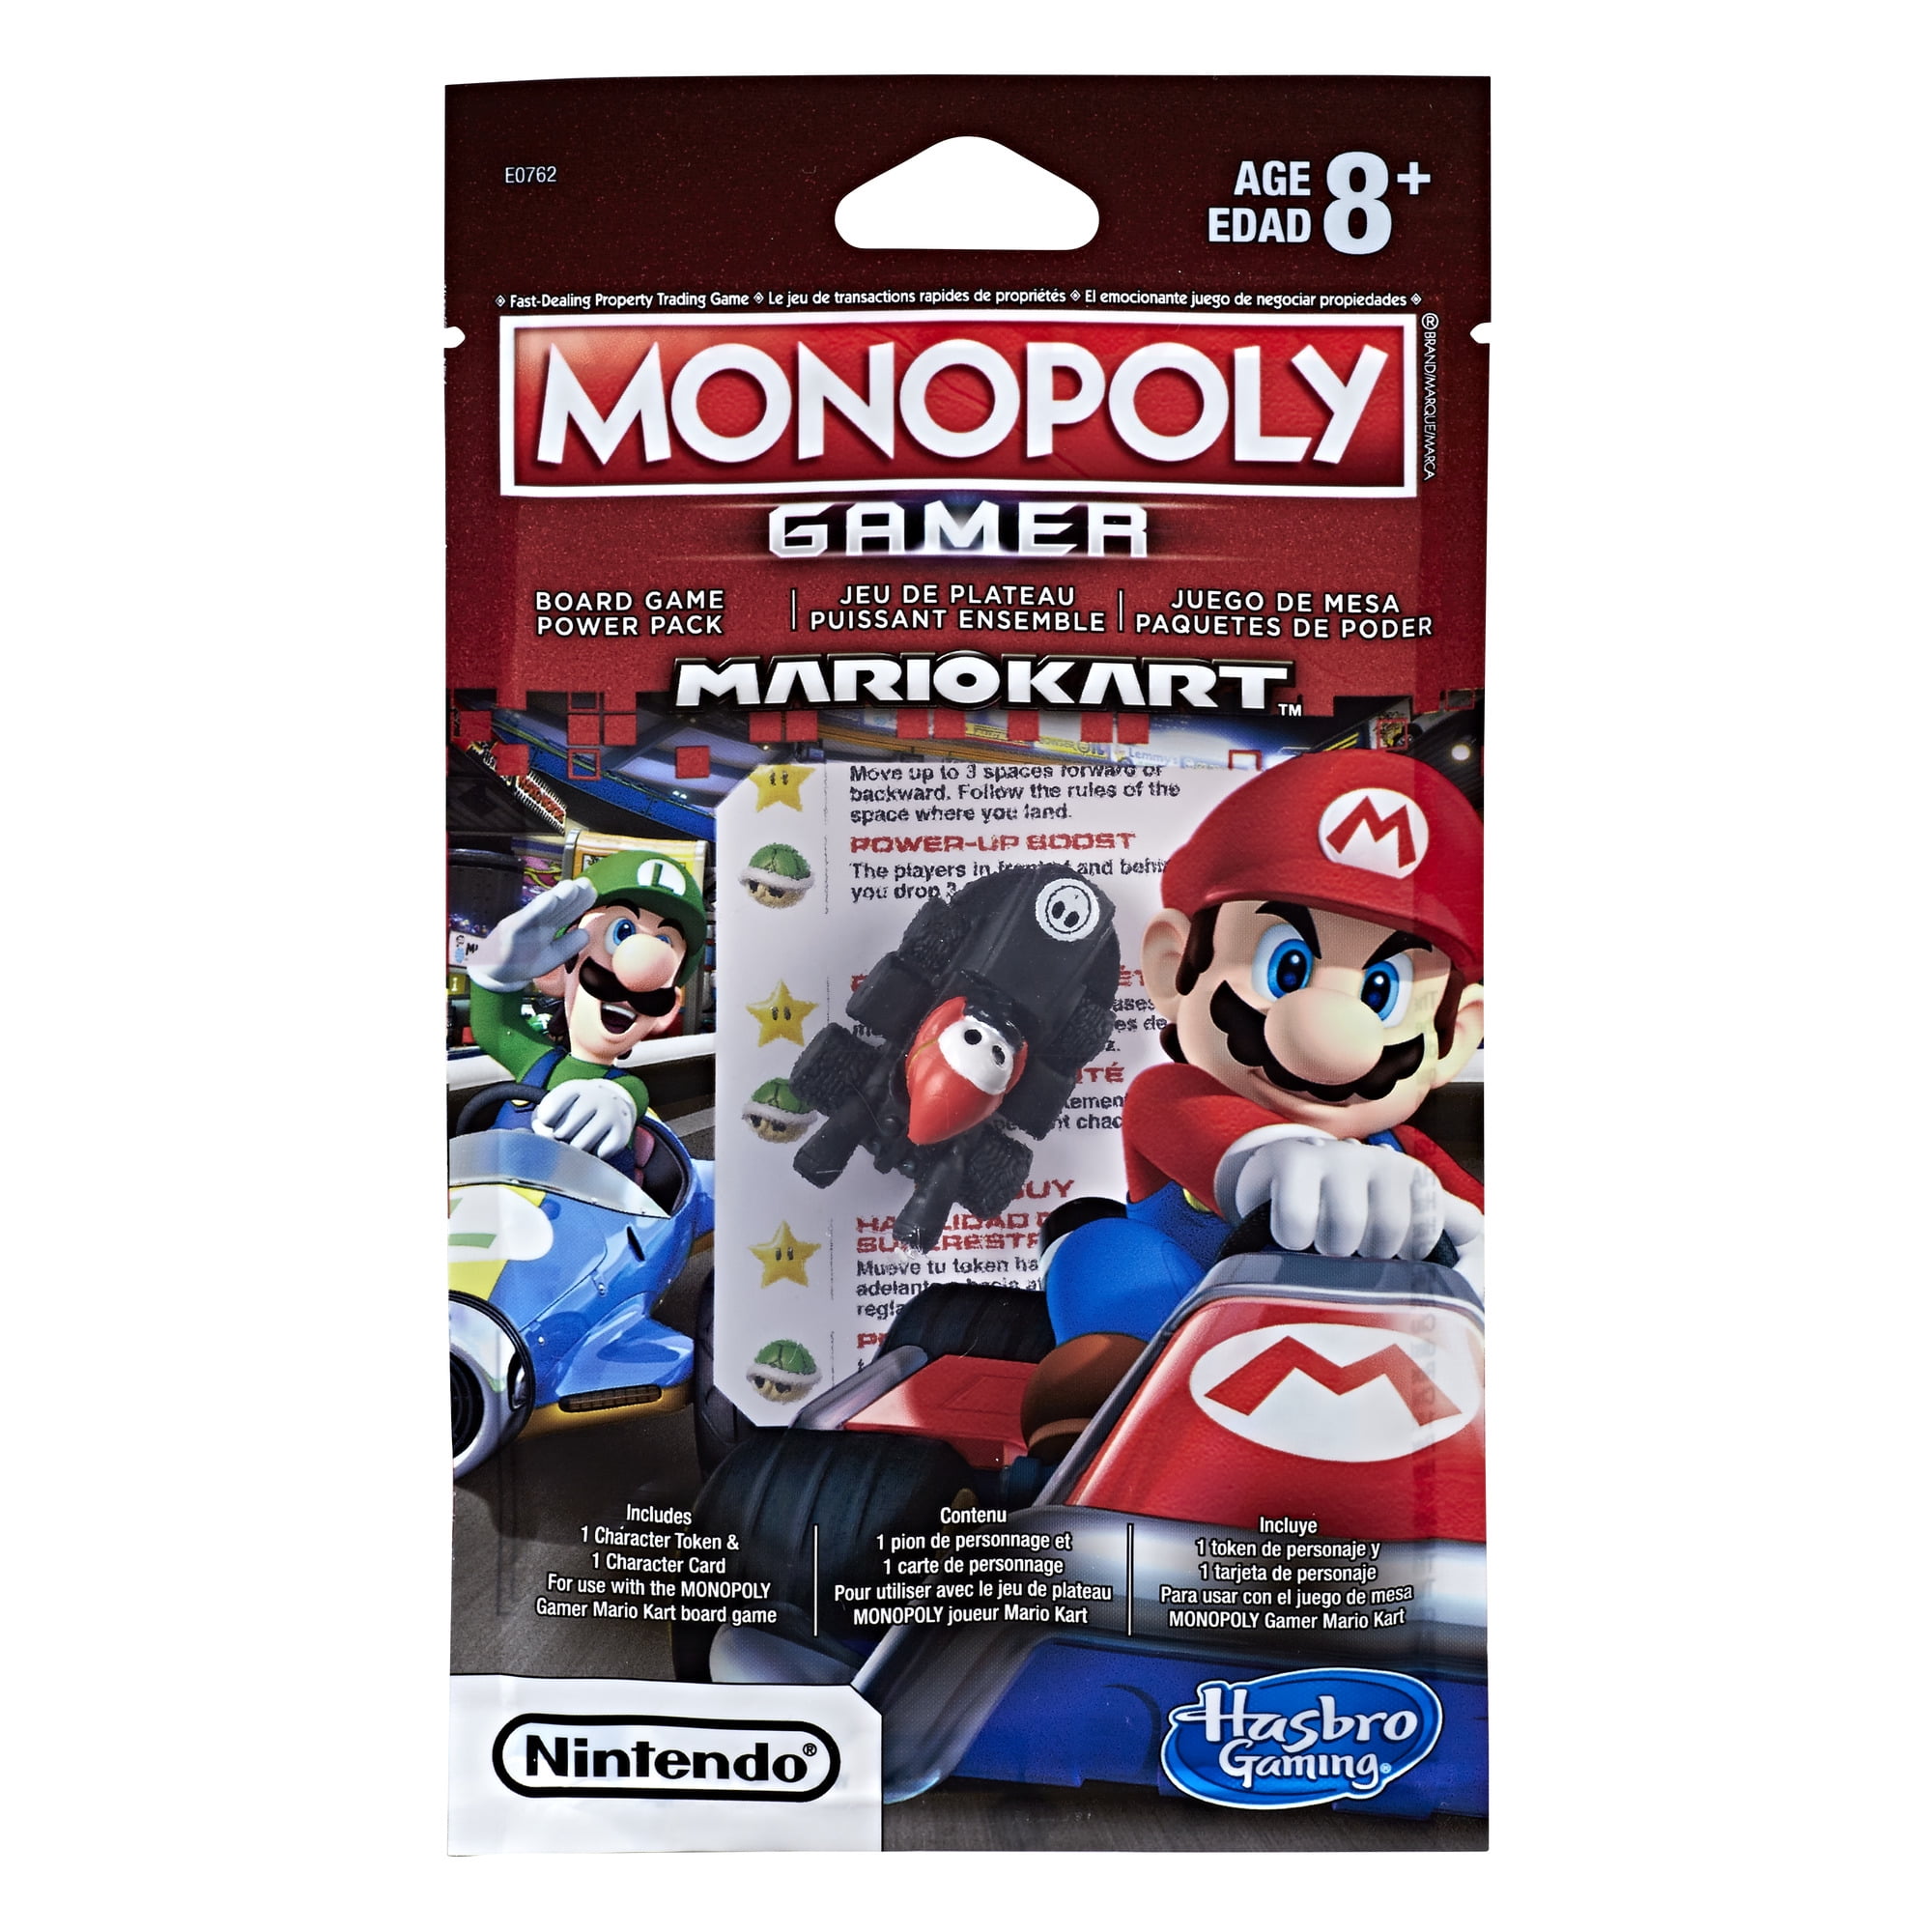 Details about   HASBRO GAMING MONOPOLY GAMER MARIOKART BOARD GAME POWER PACK DONKEY KONG NEW 